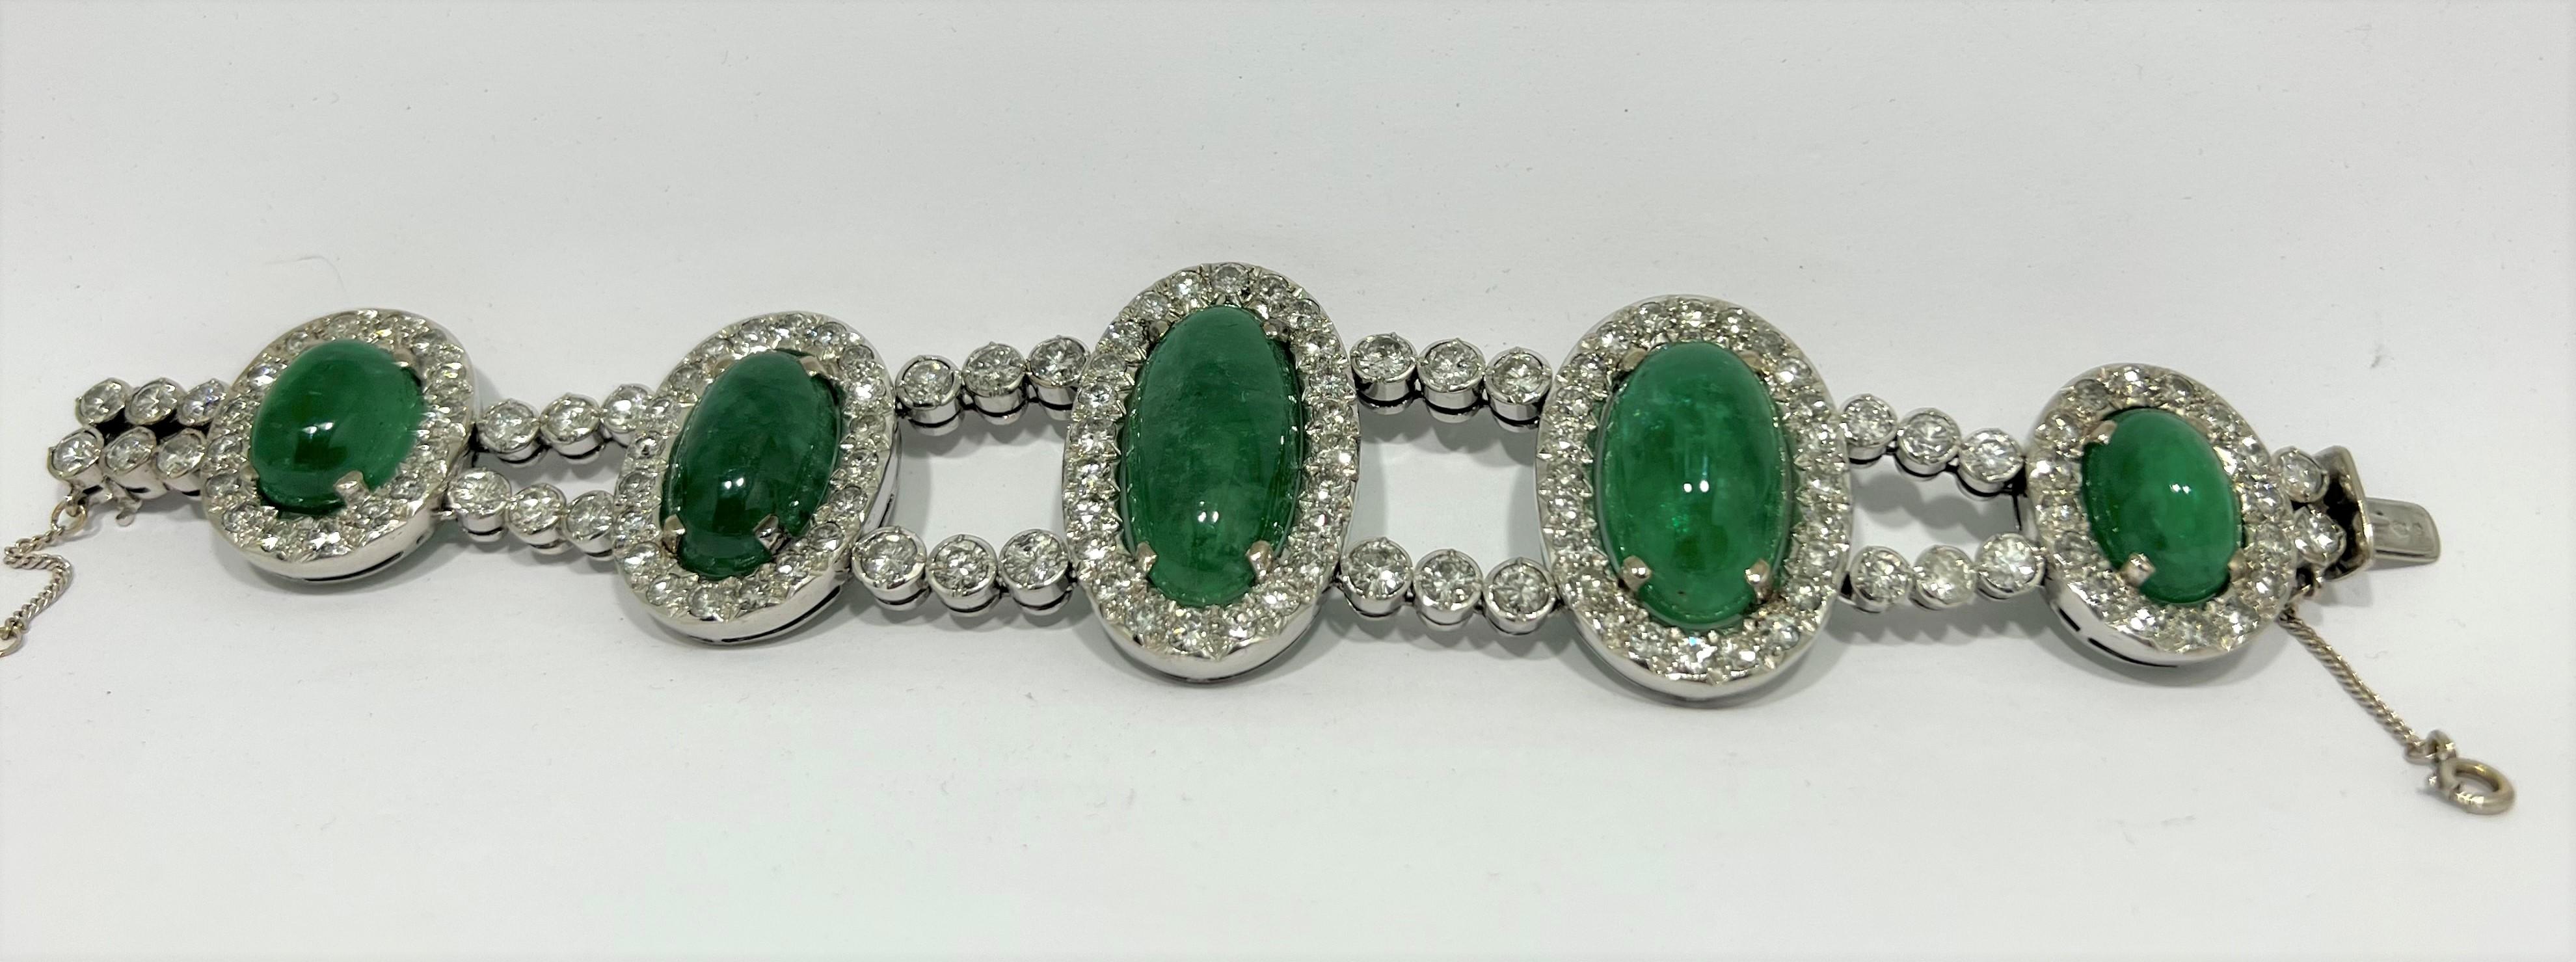 Artisan 60's Colombian Cabouchon 70ct Emerald Bracelet in 18k Gold and Diamonds